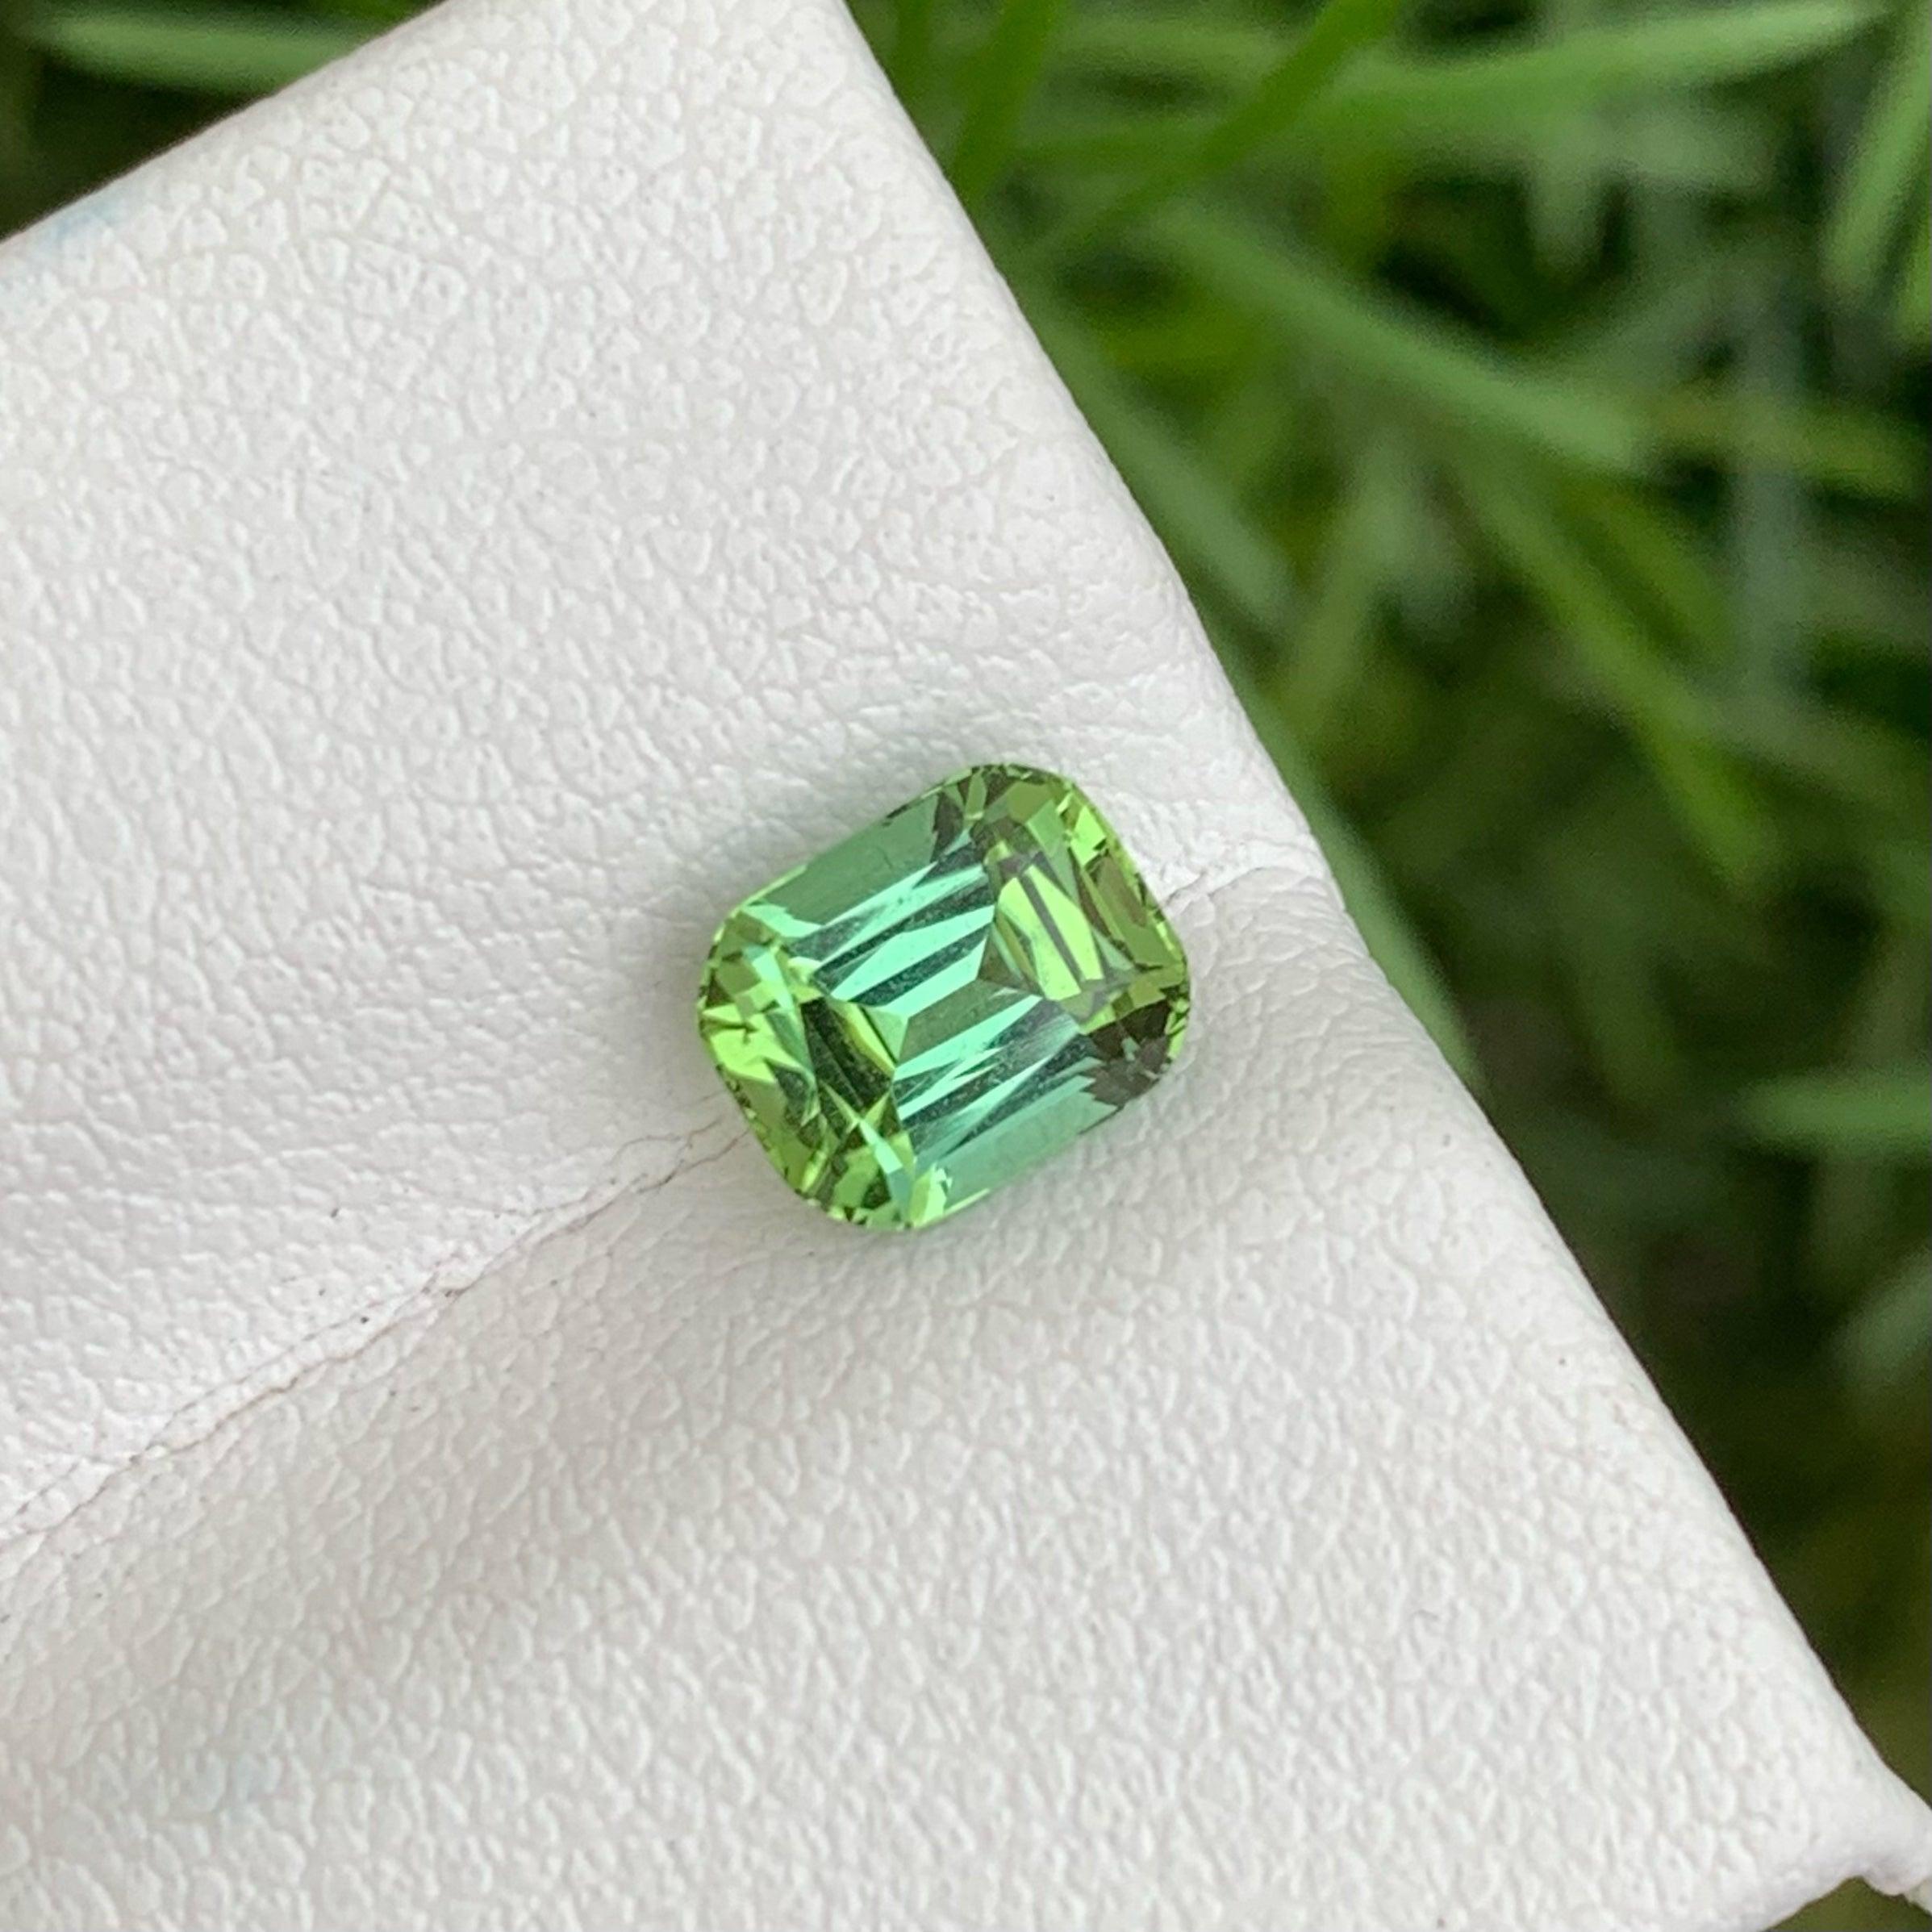 Beautiful Natural Loose Tourmaline Gemstone, available for sale at wholesale price natural high quality 1.25 Carats Loose Tourmaline From Afghanistan.

Product Information:
GEMSTONE TYPE:	Beautiful Natural Loose Tourmaline Gemstone
WEIGHT:	1.25